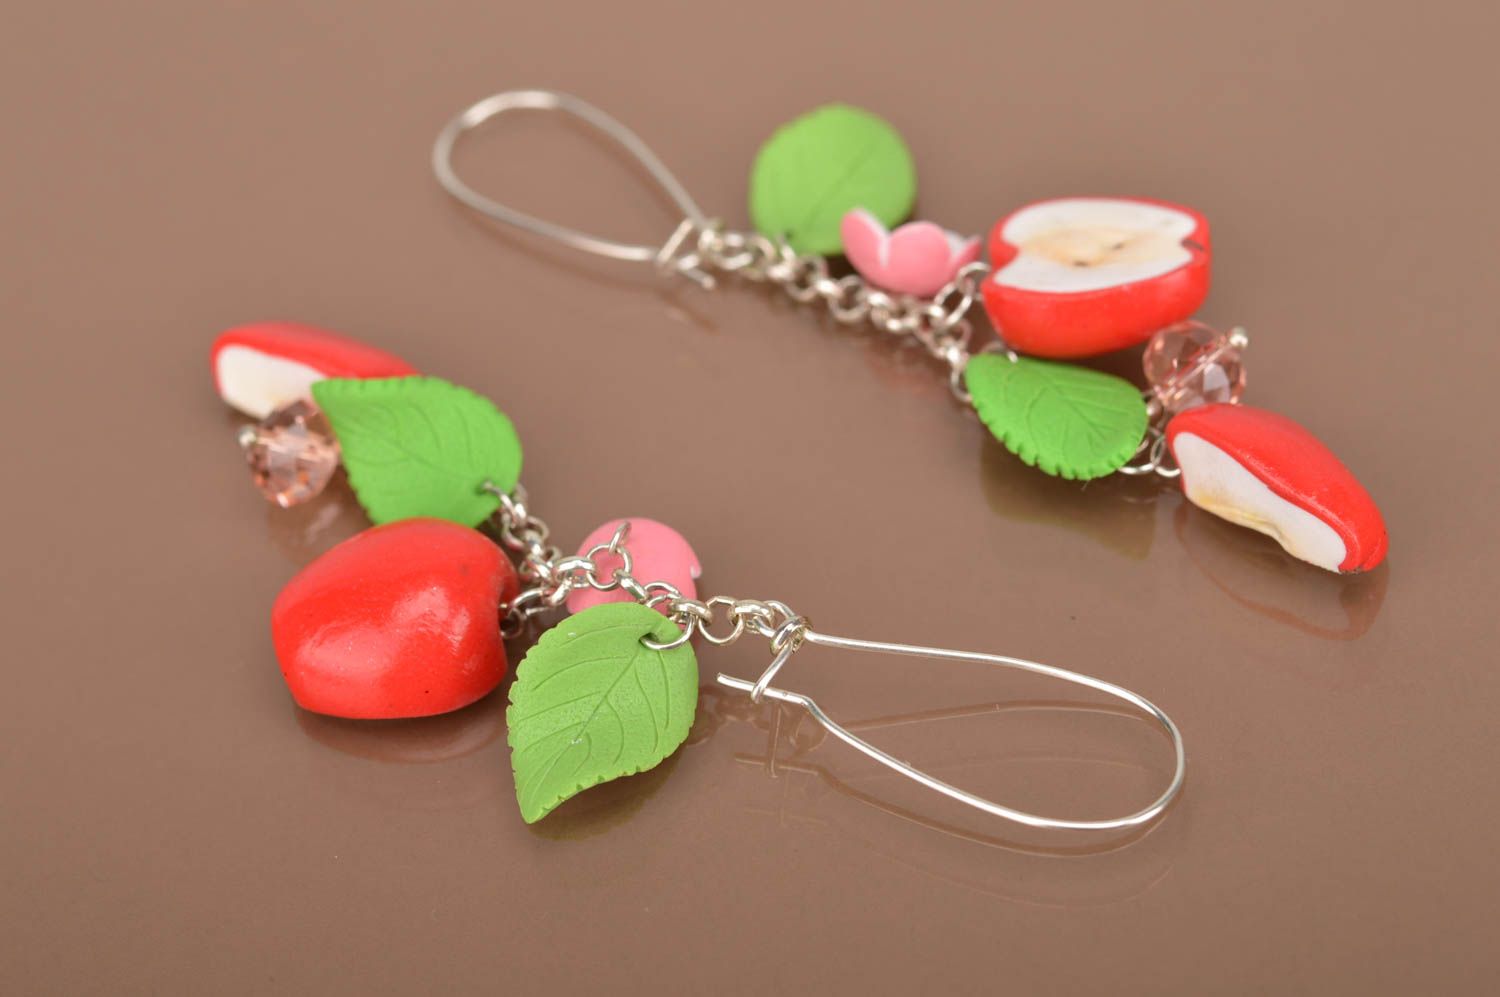 Homemade long polymer clay earrings unusual plastic earrings fashion accessories photo 3